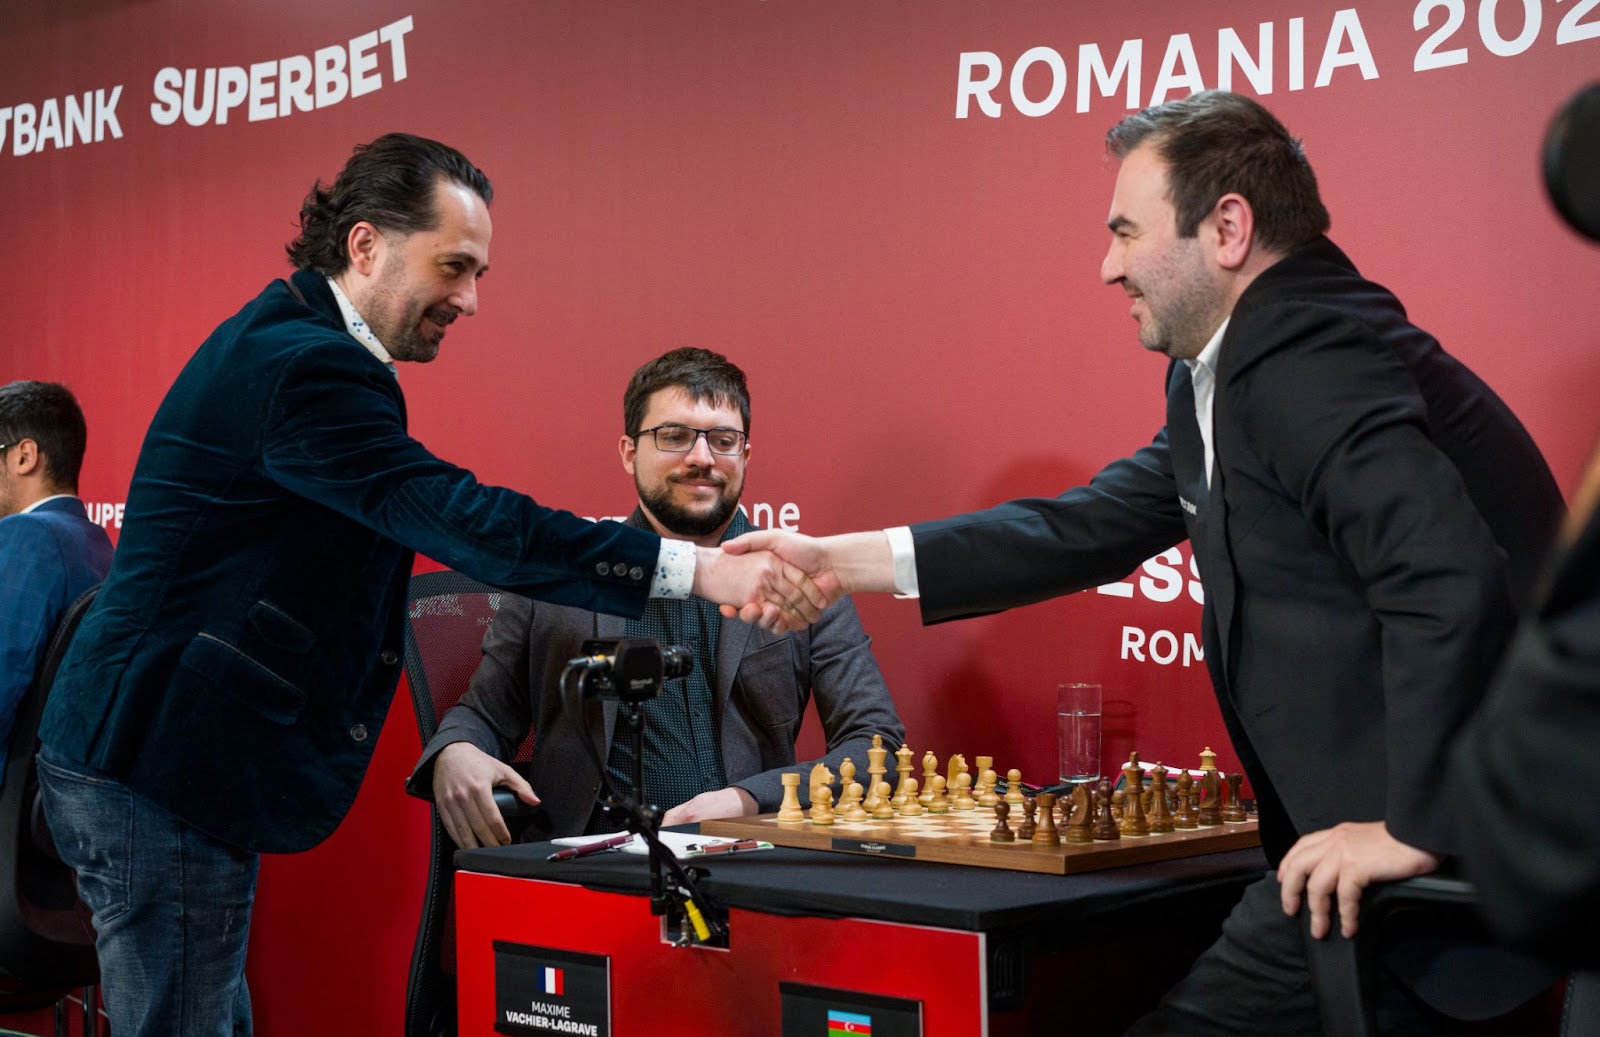 Happy birthday to the 2023 #grandchesstour participant GM Richard Rapport!  Looking forward to seeing you in Romania! #chess #richardrapport